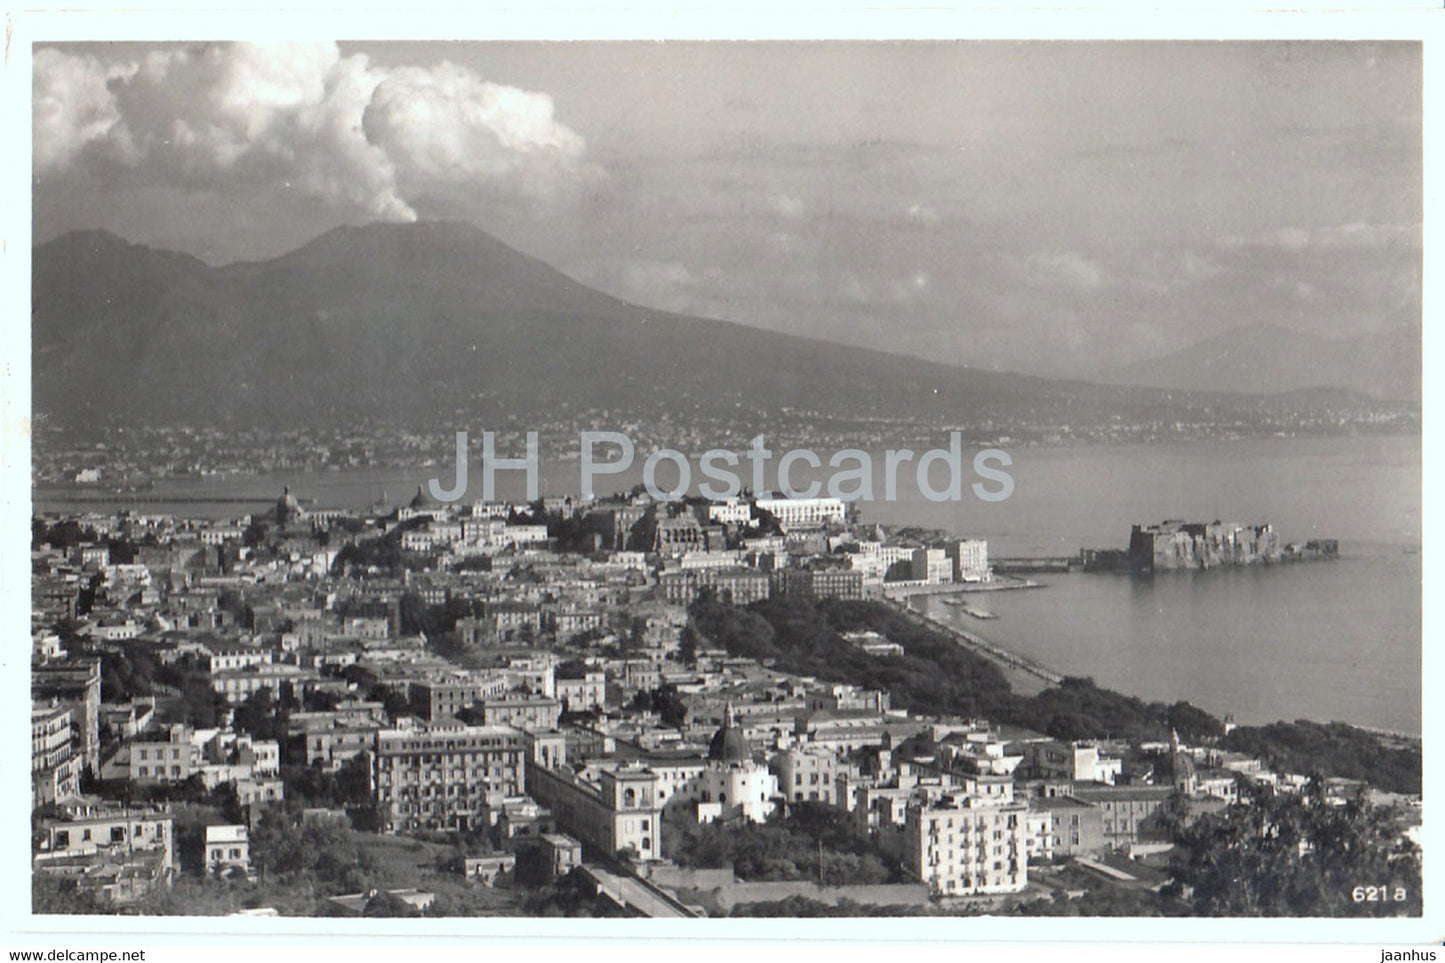 Neapel - Napoli - panorama - 621 a - old postcard - 1939 - Italy - used - JH Postcards